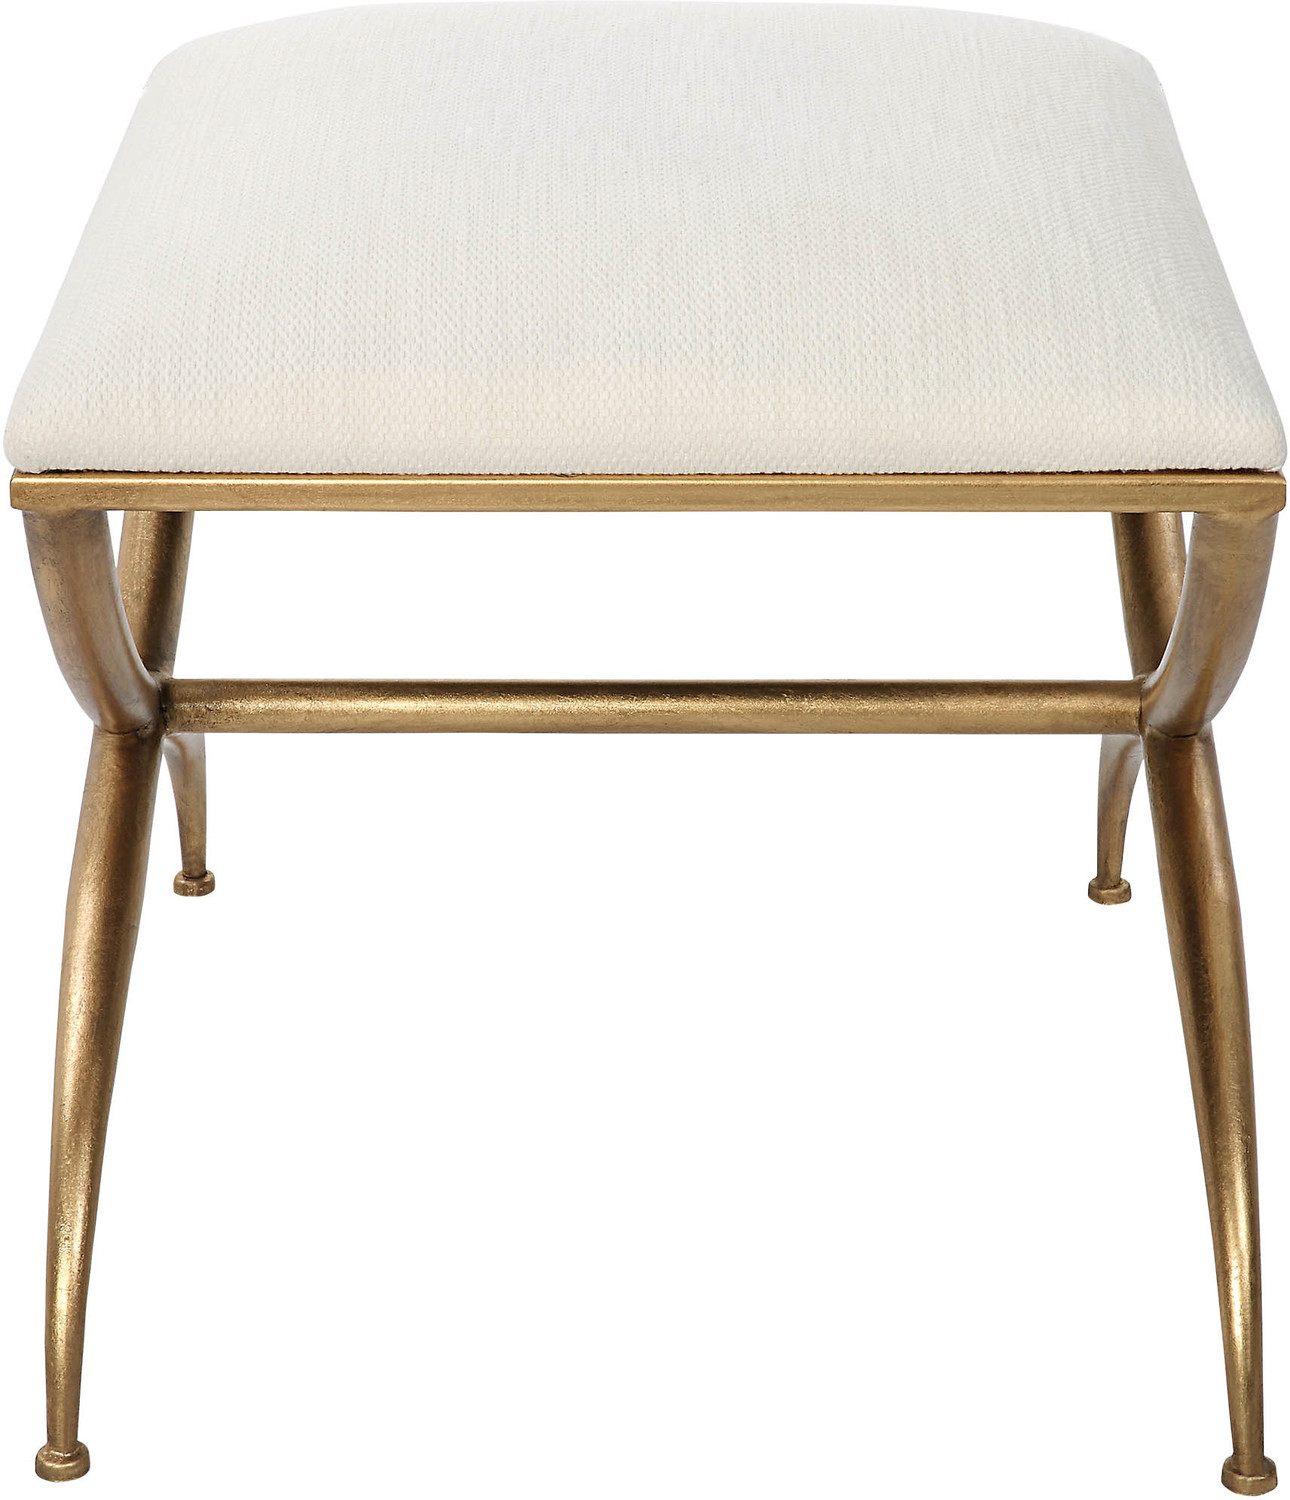 blue accent chair cheap Uttermost Benches Classic Yet Stylish, This Small Bench Features A Curved Iron Frame Finished In An Elegant Gold Leaf. The Cushioned Top Is Upholstered In A Crisp White Fabric, Doubling As A Comfortable Seat Or Footrest.